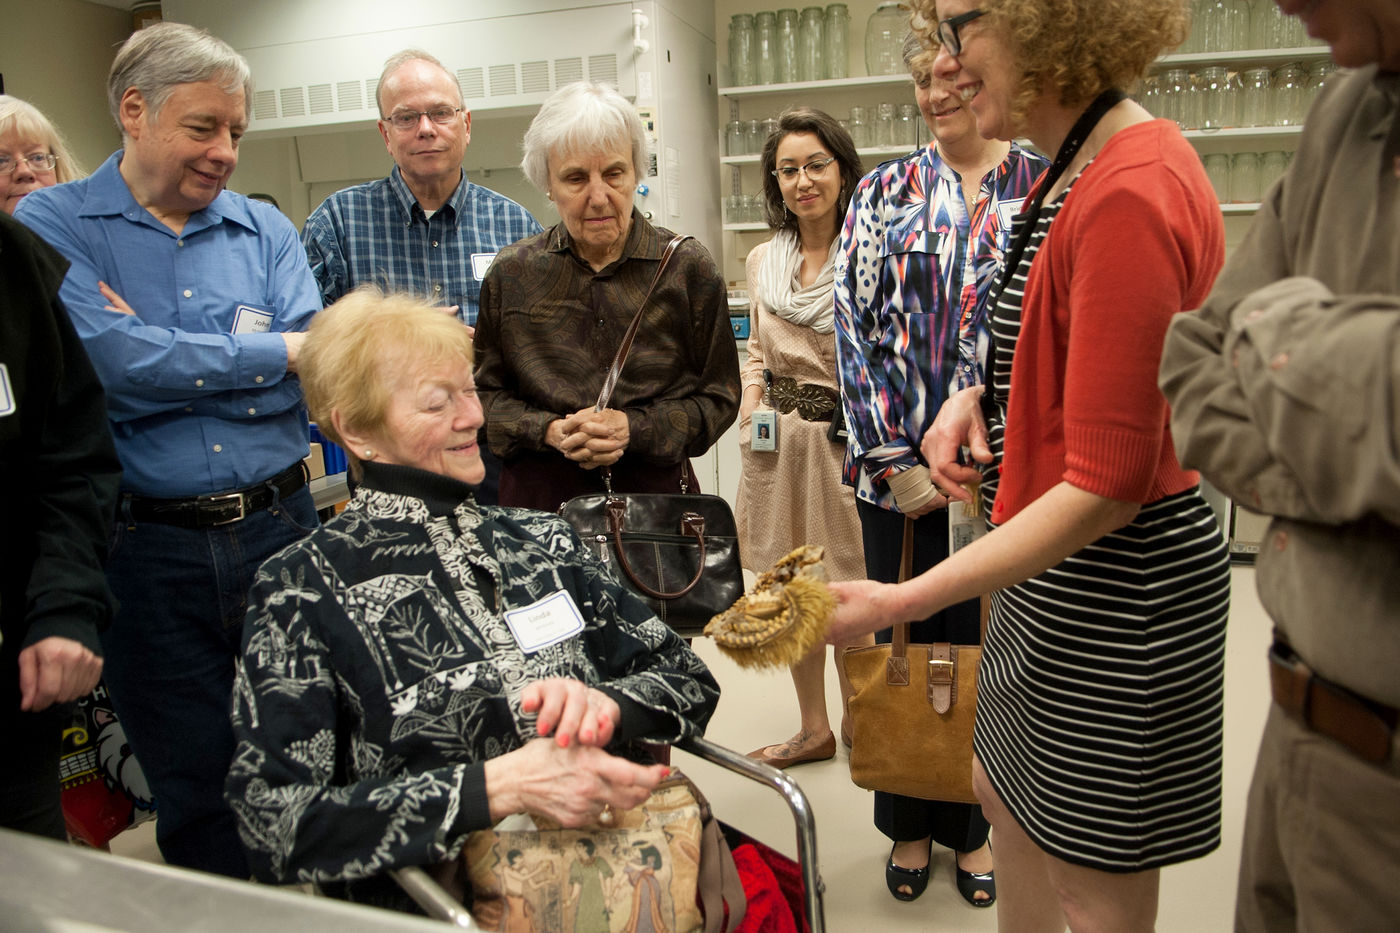 An older woman in a wheelchair smiles as she looks at a specimen held by a staff member. Other adults in the group stand around the pair, looking intently at the specimen. Clear jars are on shelves in the background.